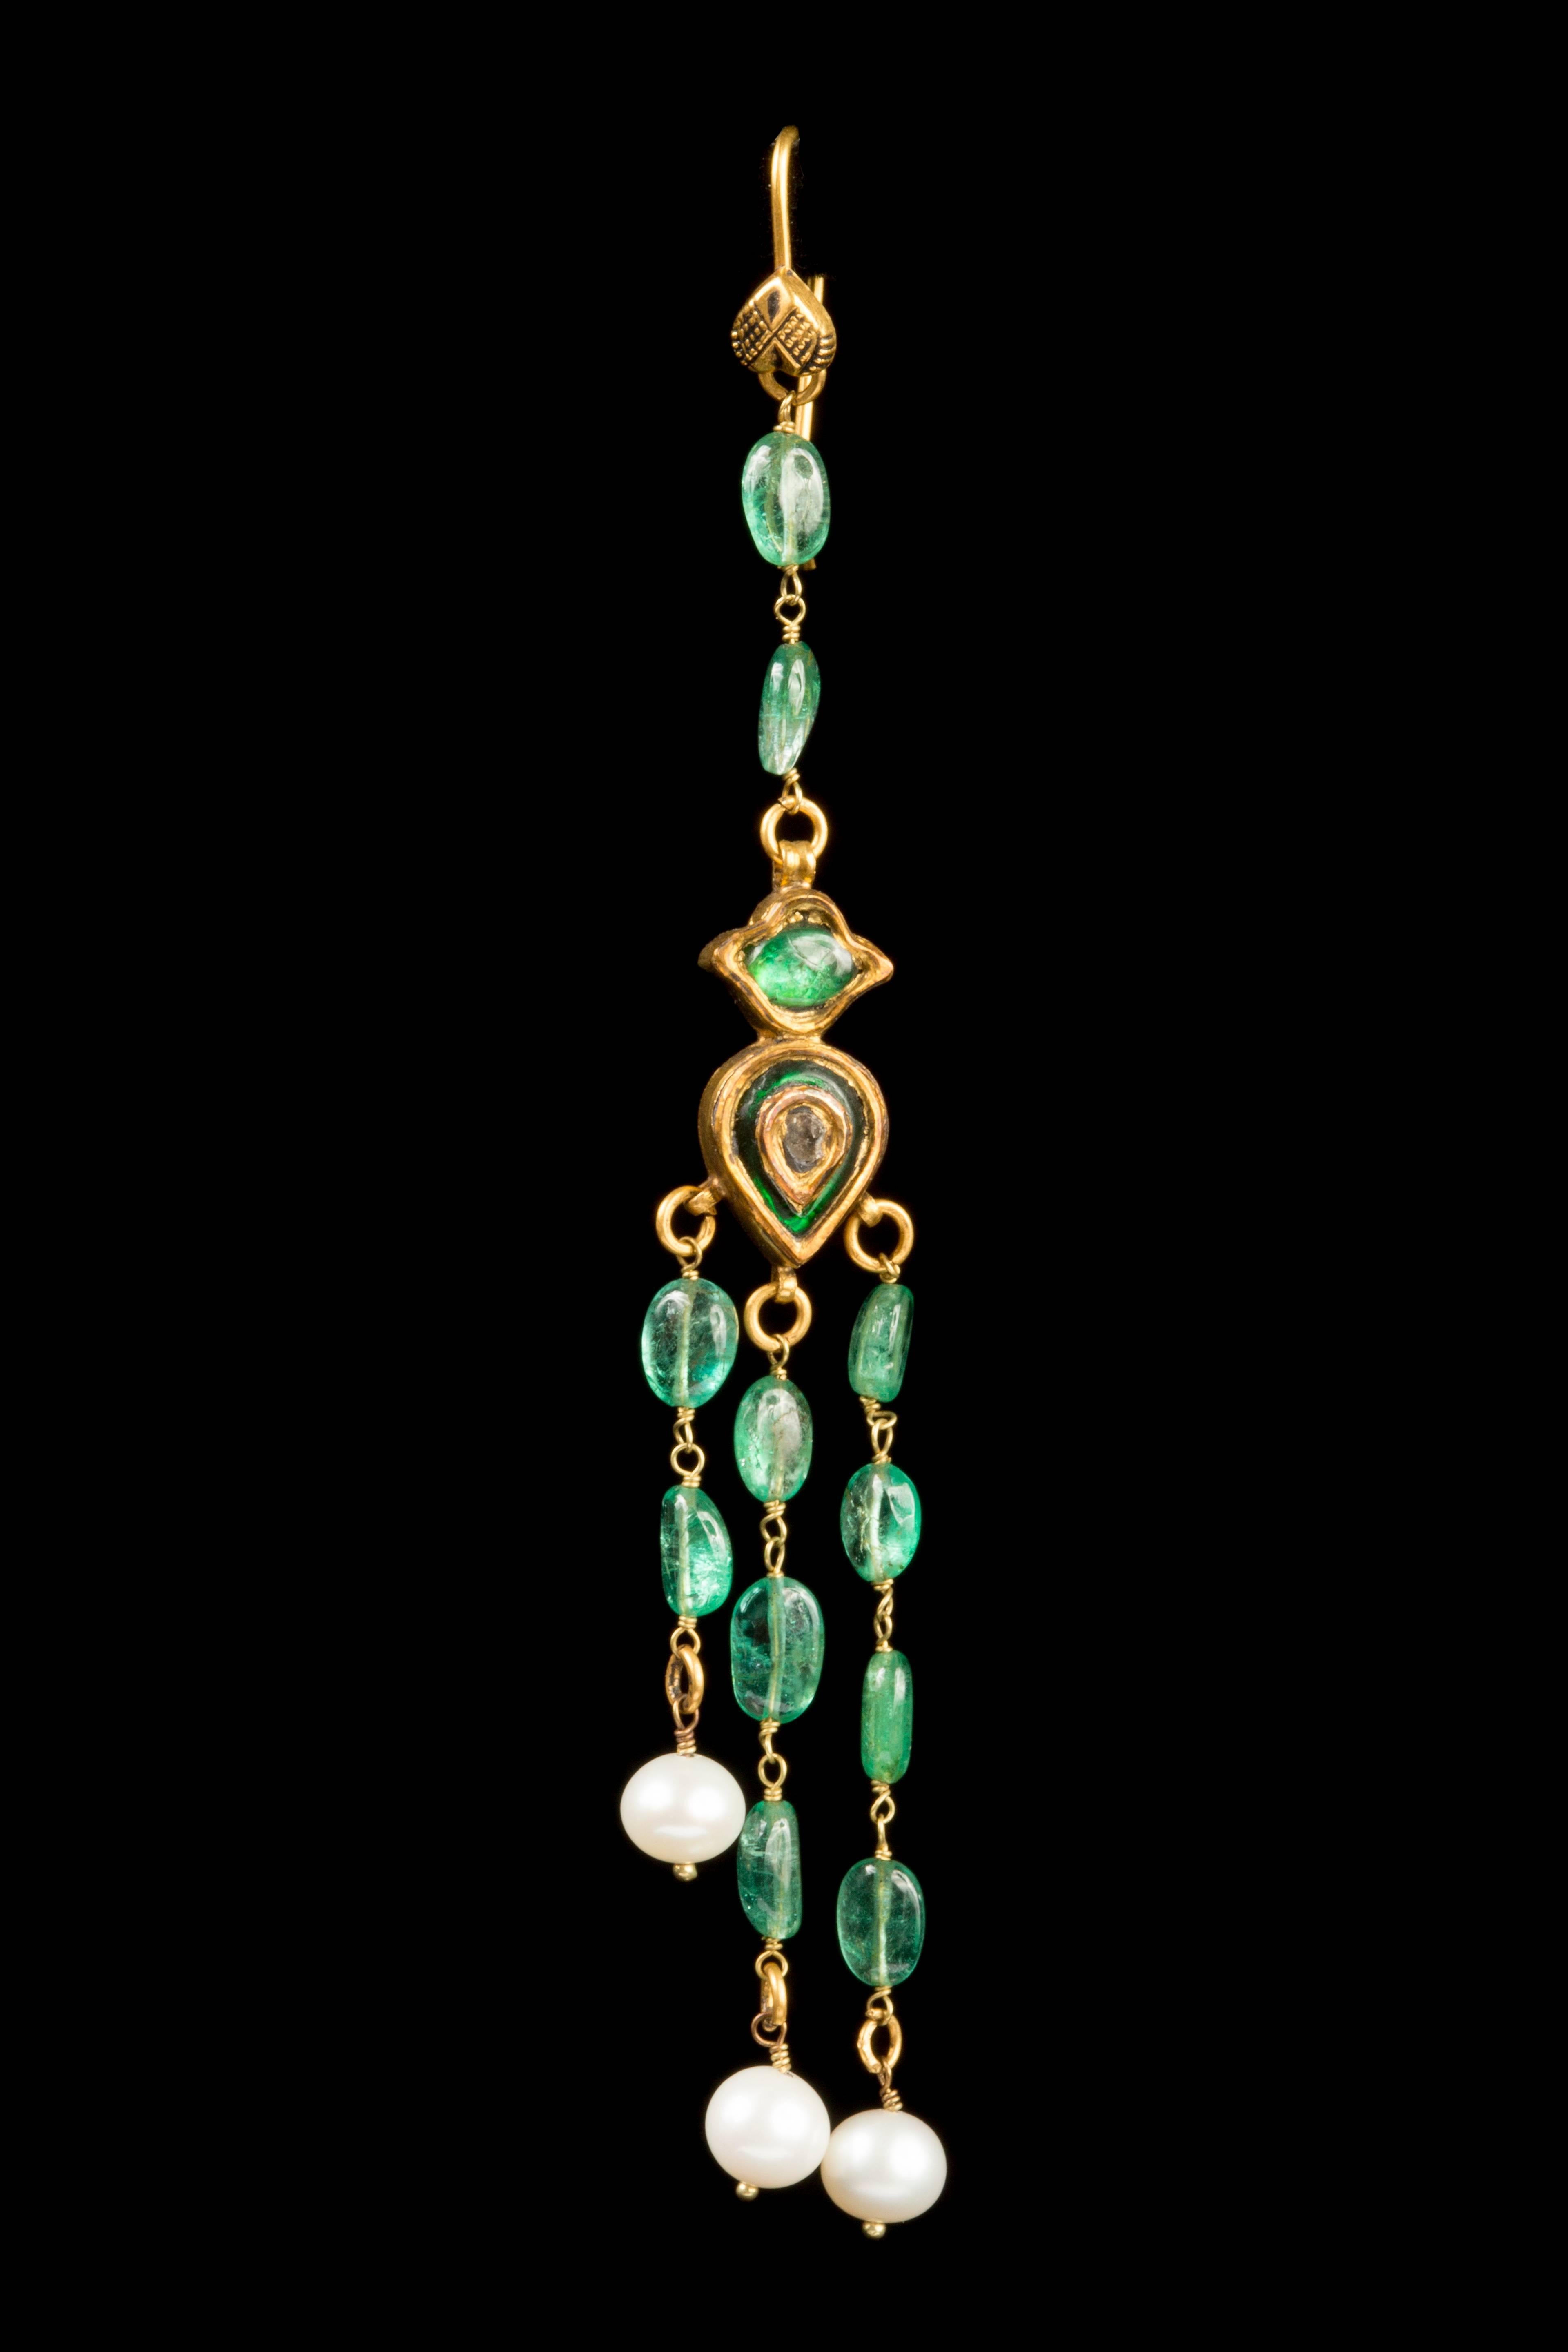 Old indian emerald cascade earrings with diamond in the center and 3 basra pearls. Each earring is 9.5 cm long.